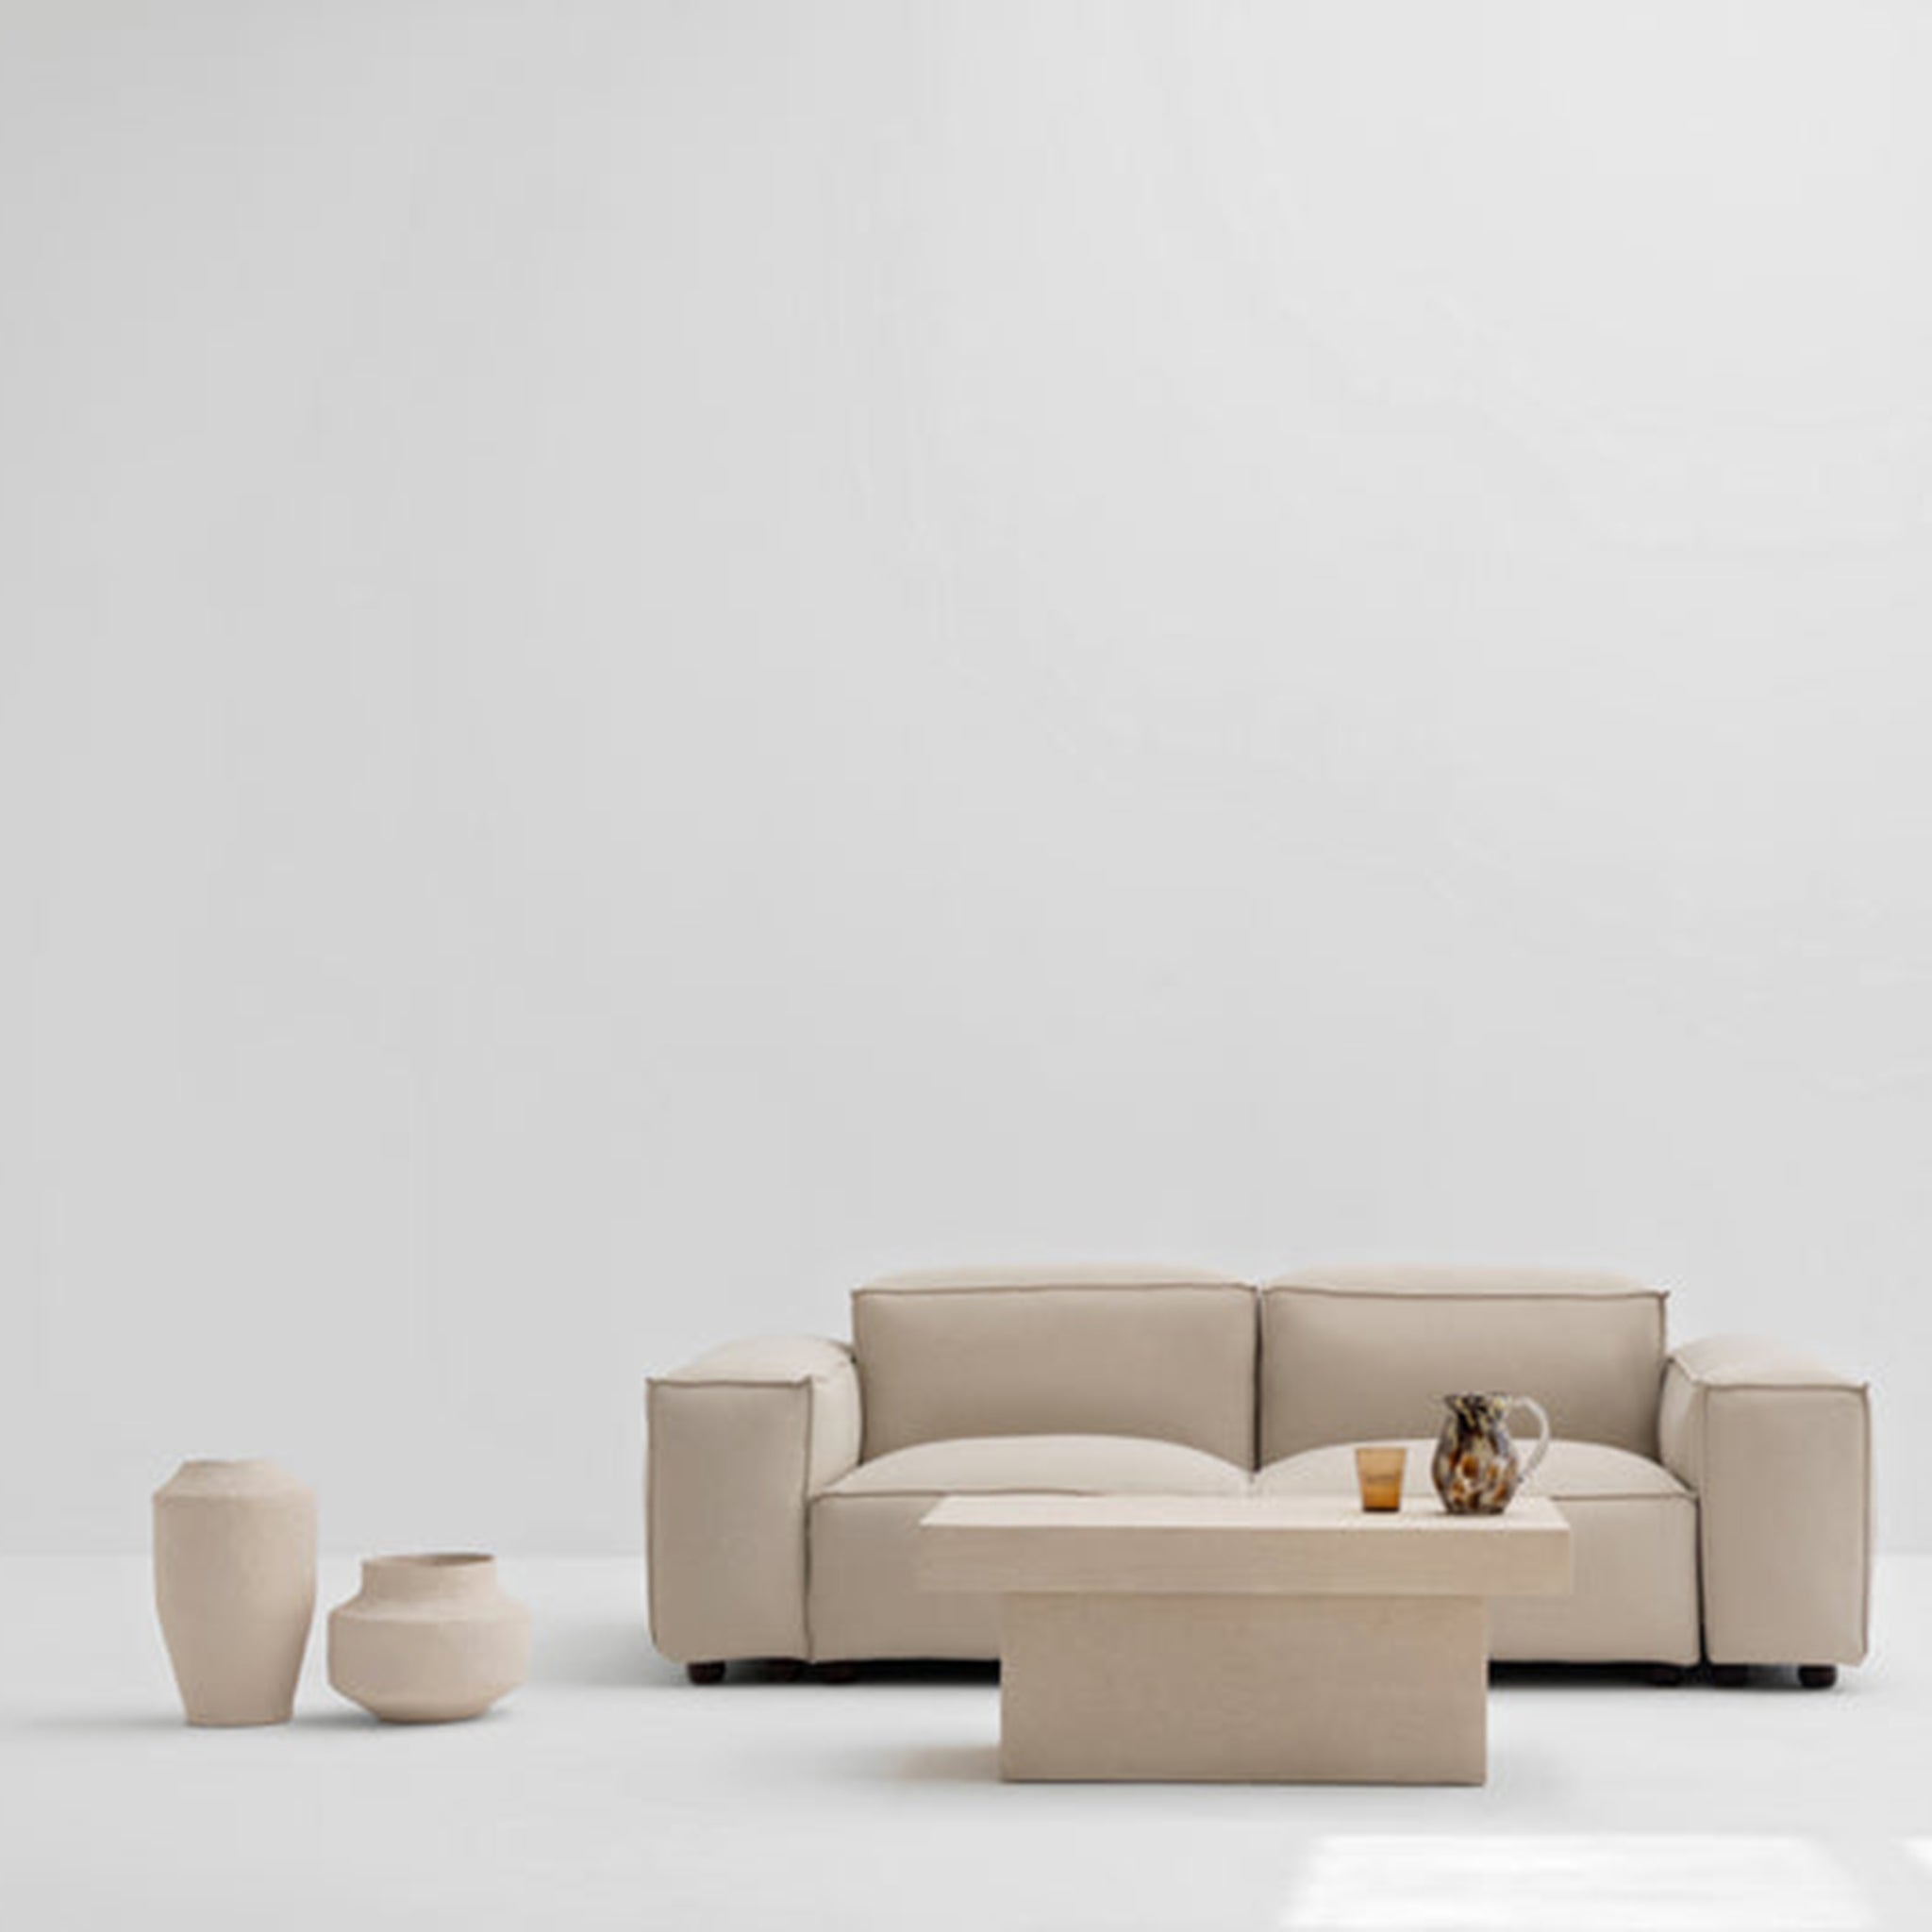 Minimalist beige sofa set with matching coffee table and decorative vases